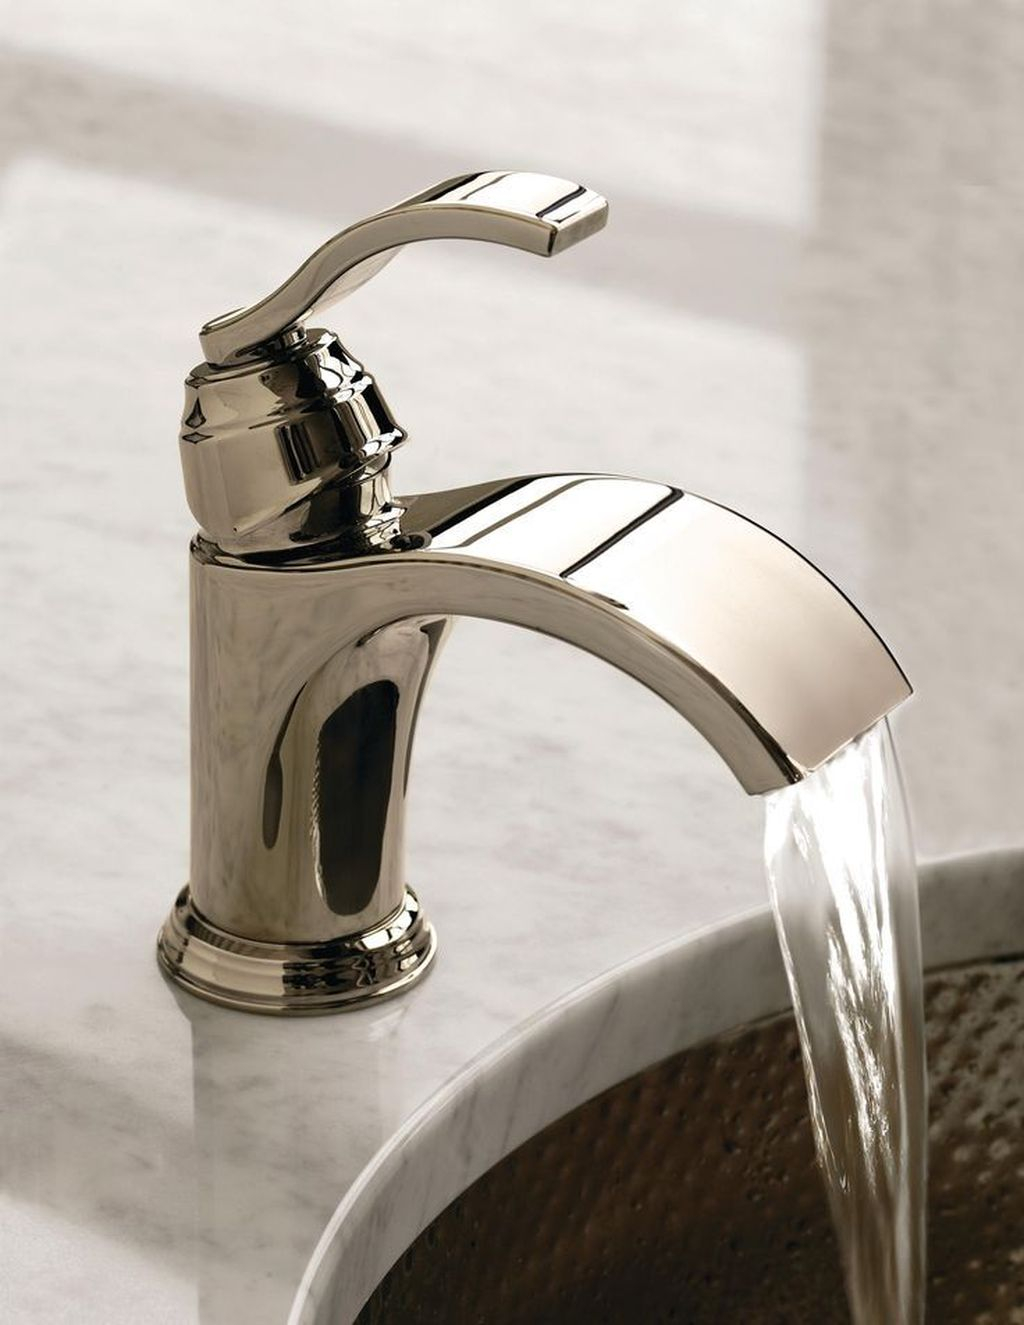 Incredible Water Faucet Design Ideas For Your Bathroom Sink17